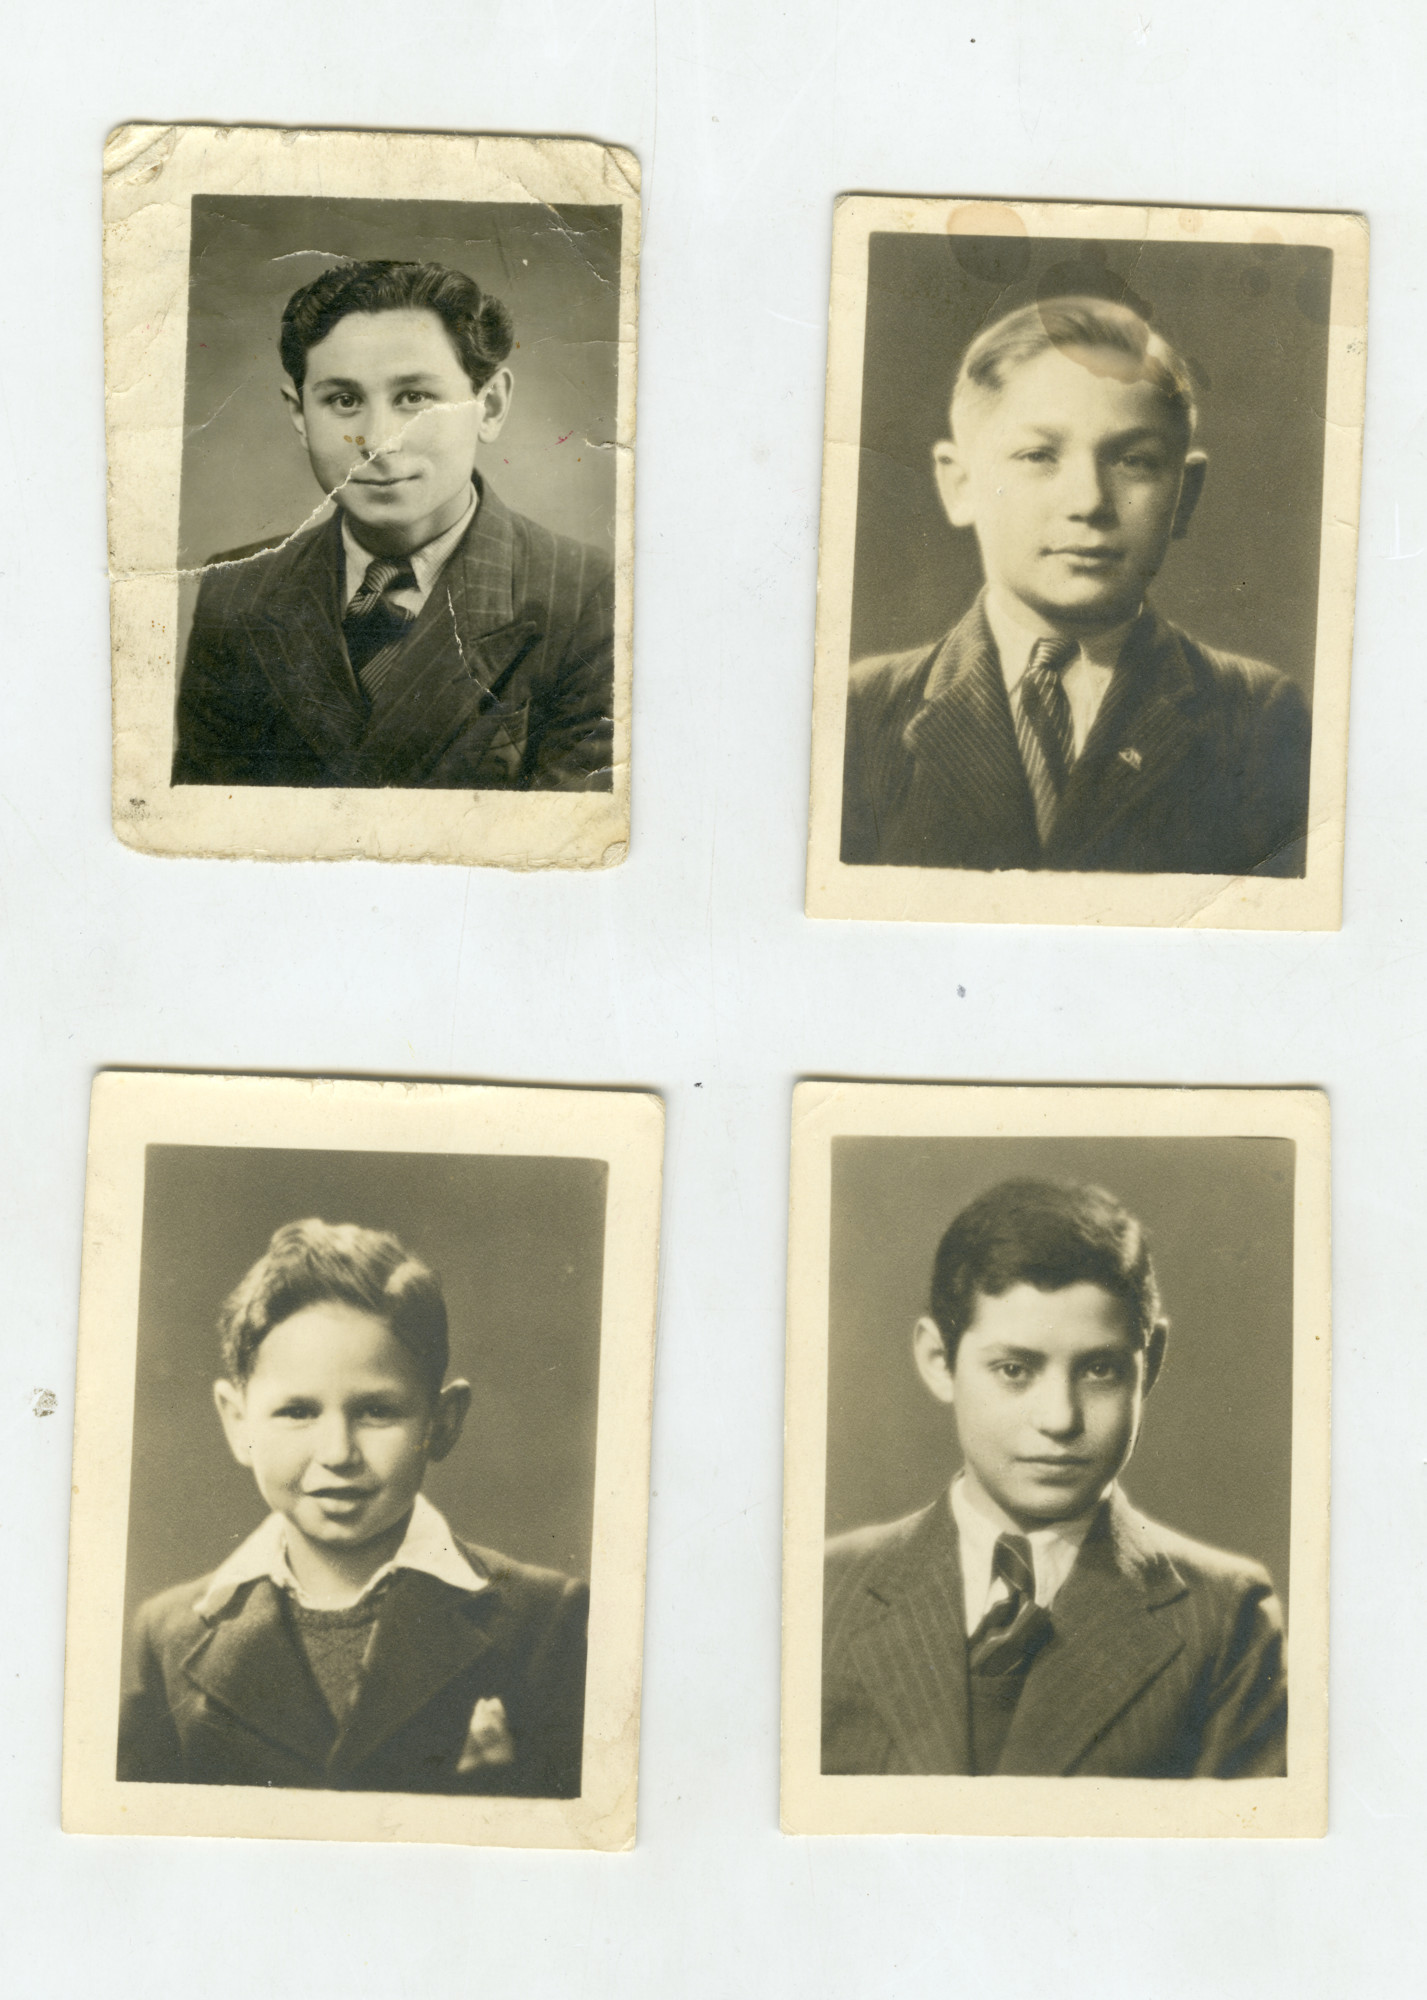 Portraits of children who lived in Home de la Bas in Belgium.

Pictured clockwise from the upper left are Edmund Mell, Ignas Sabot, Joseph Flaks, and Otto Druckman.